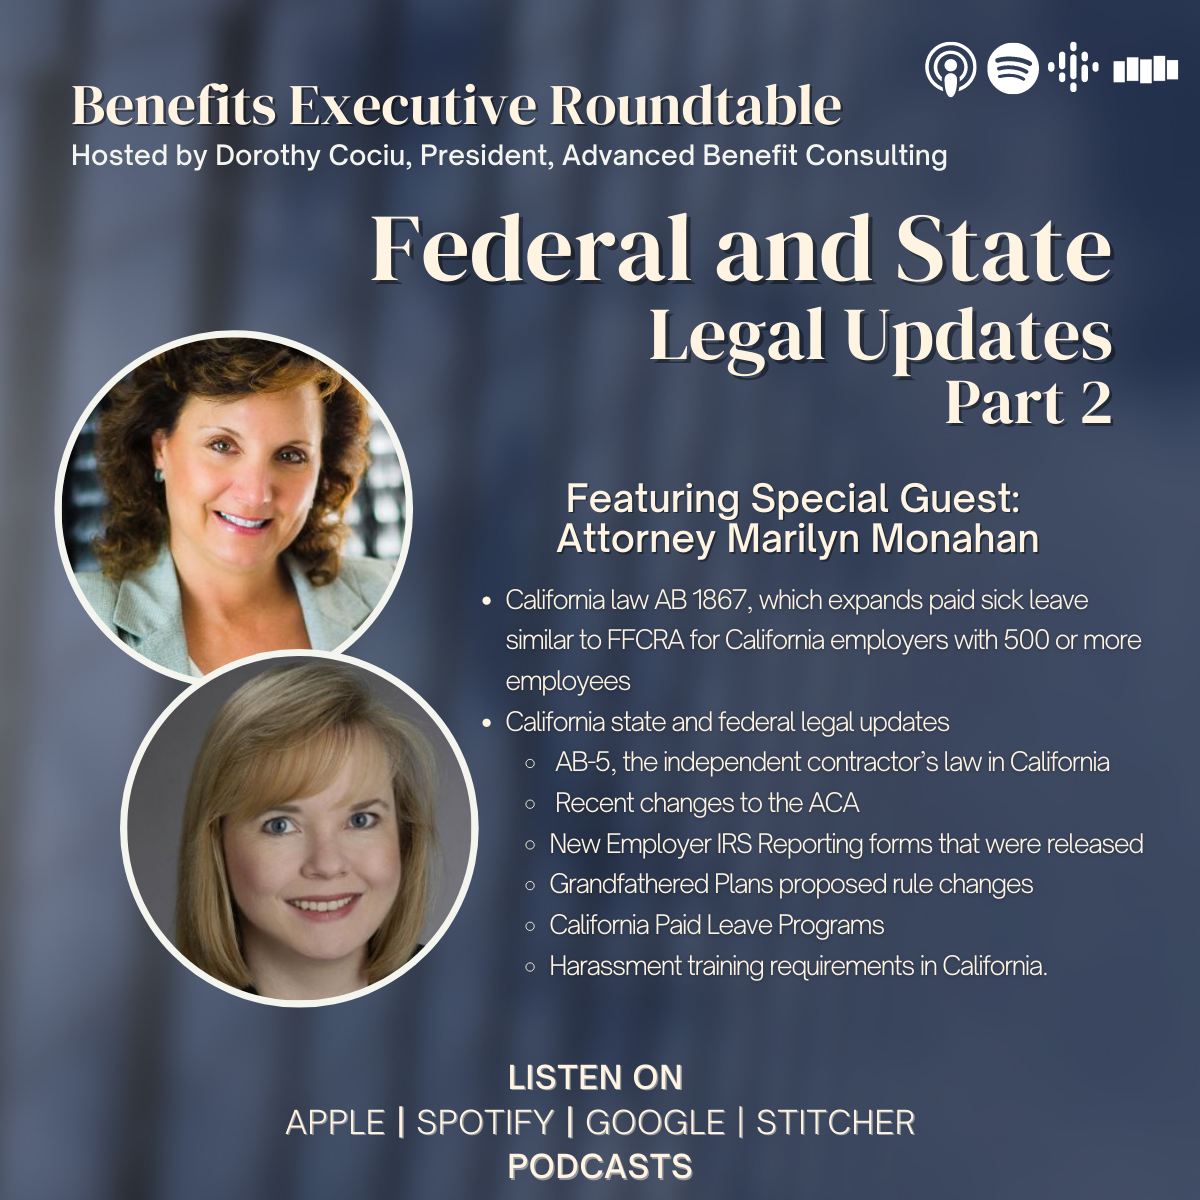 Federal and State Legal Updates Image with Dorothy Cociu and Marilyn Monahan